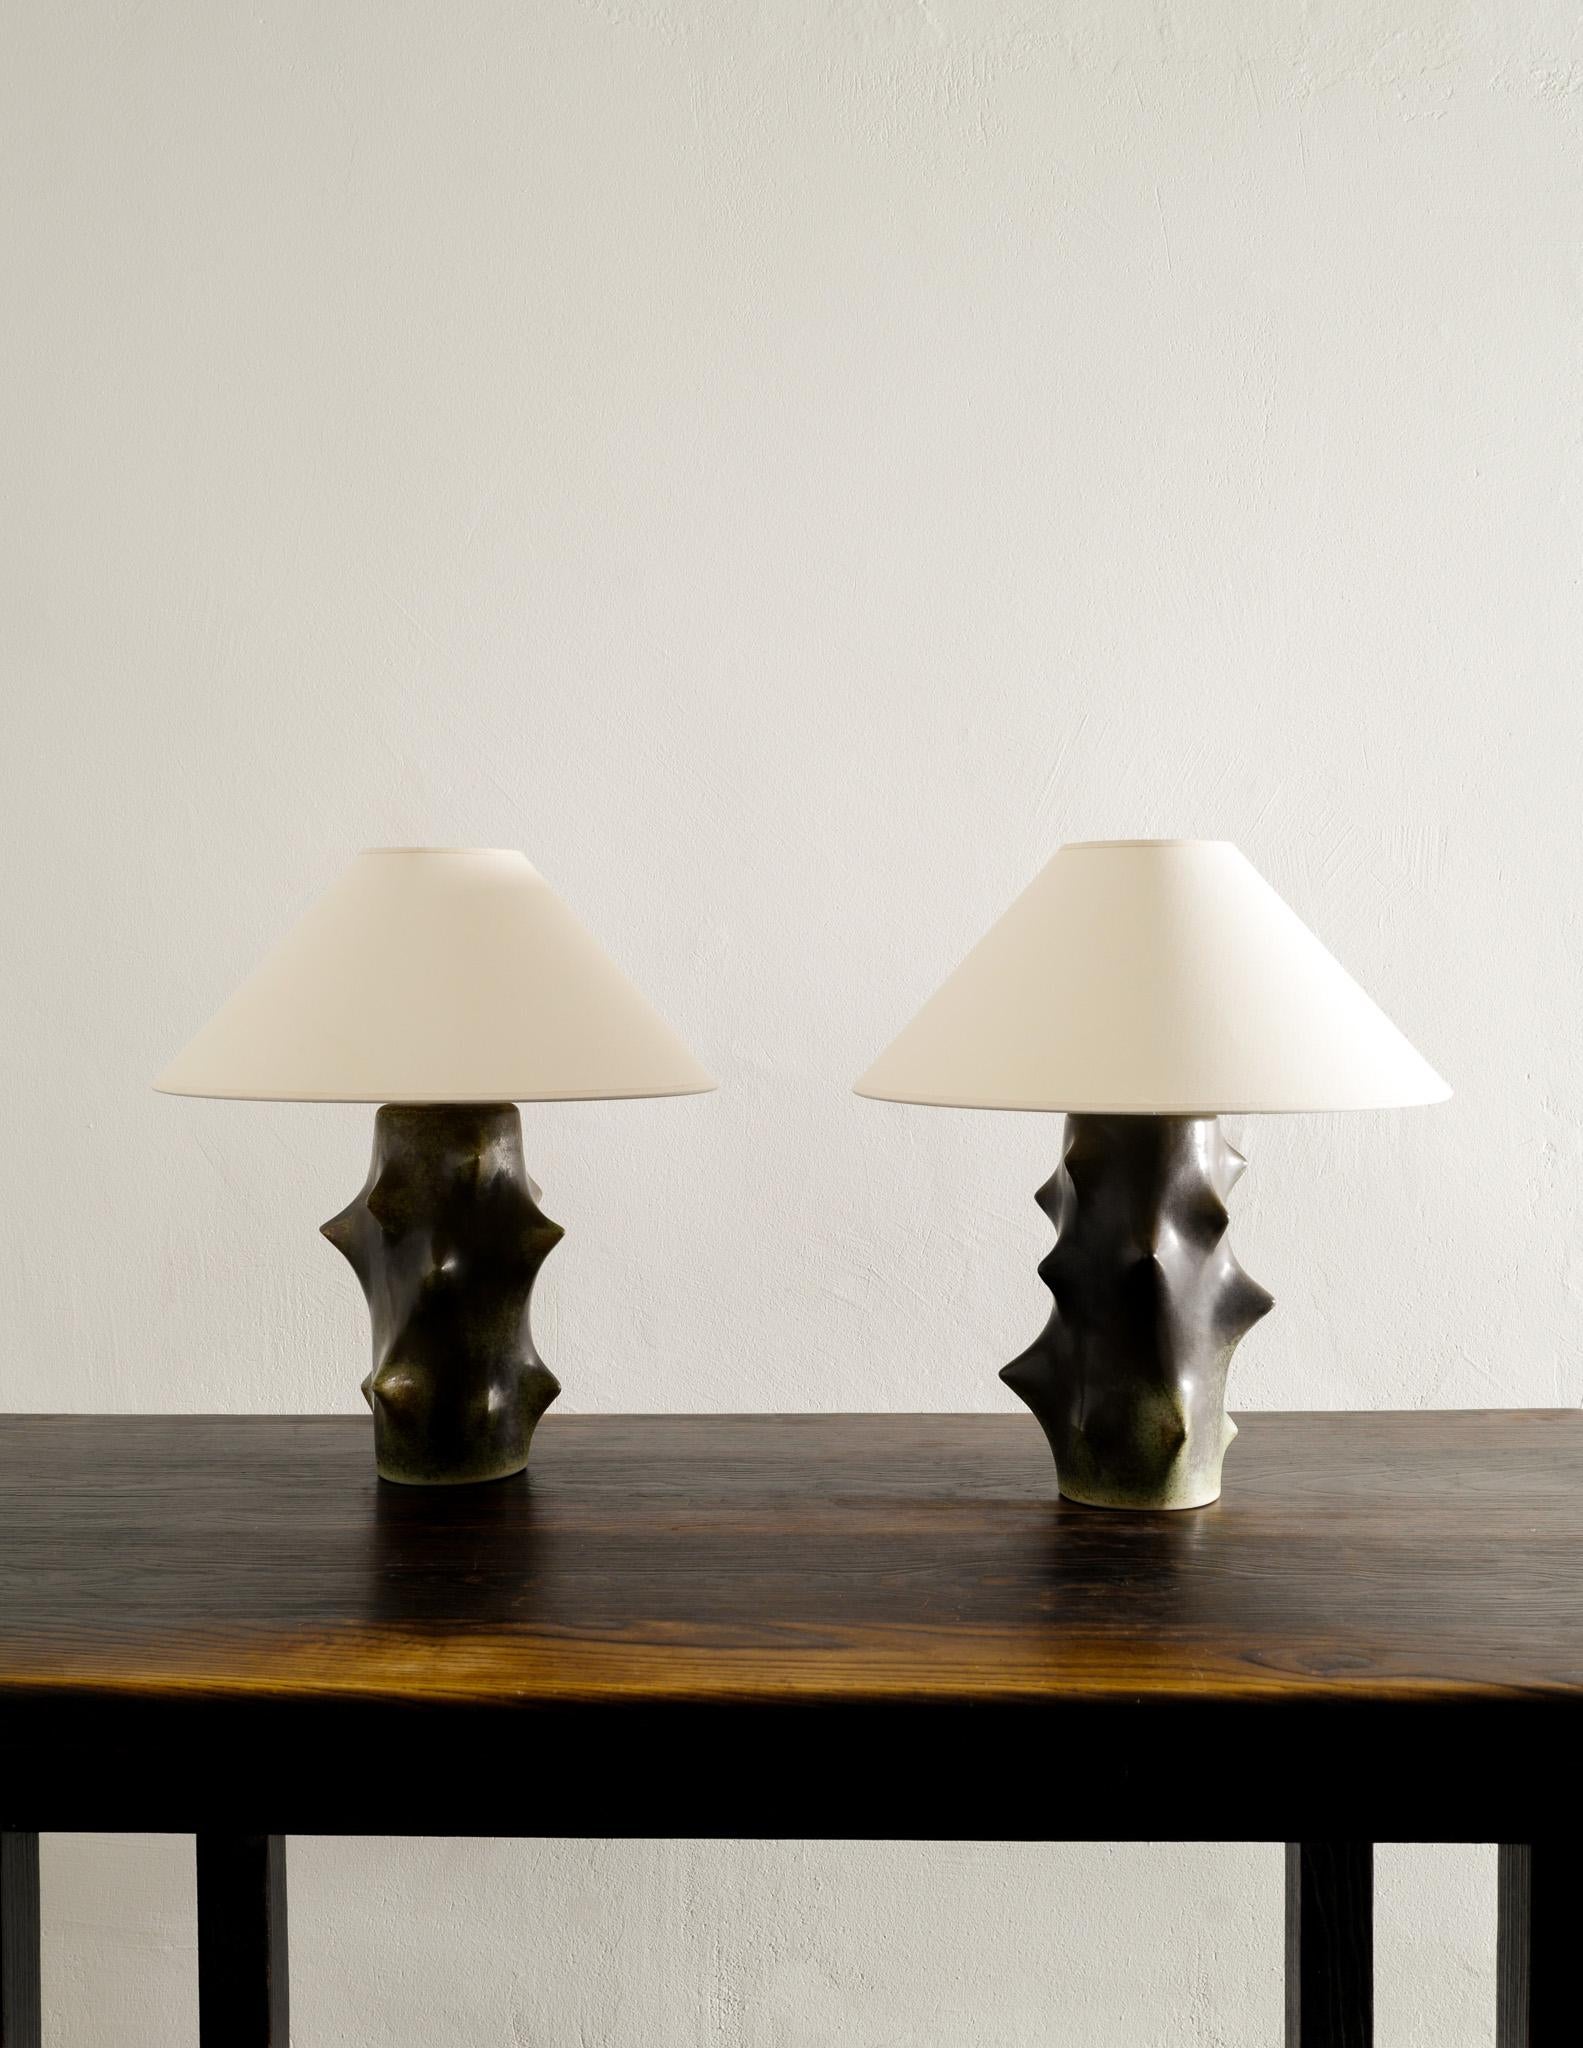 Iconic and rare pair of mid century ceramic table / bed lamps by Knud Basse and Produced by Michael Andersen, Denmark in the 1970s. In great vintage condition with minimal signs of use. Both lamps are working and can be US wired upon request.